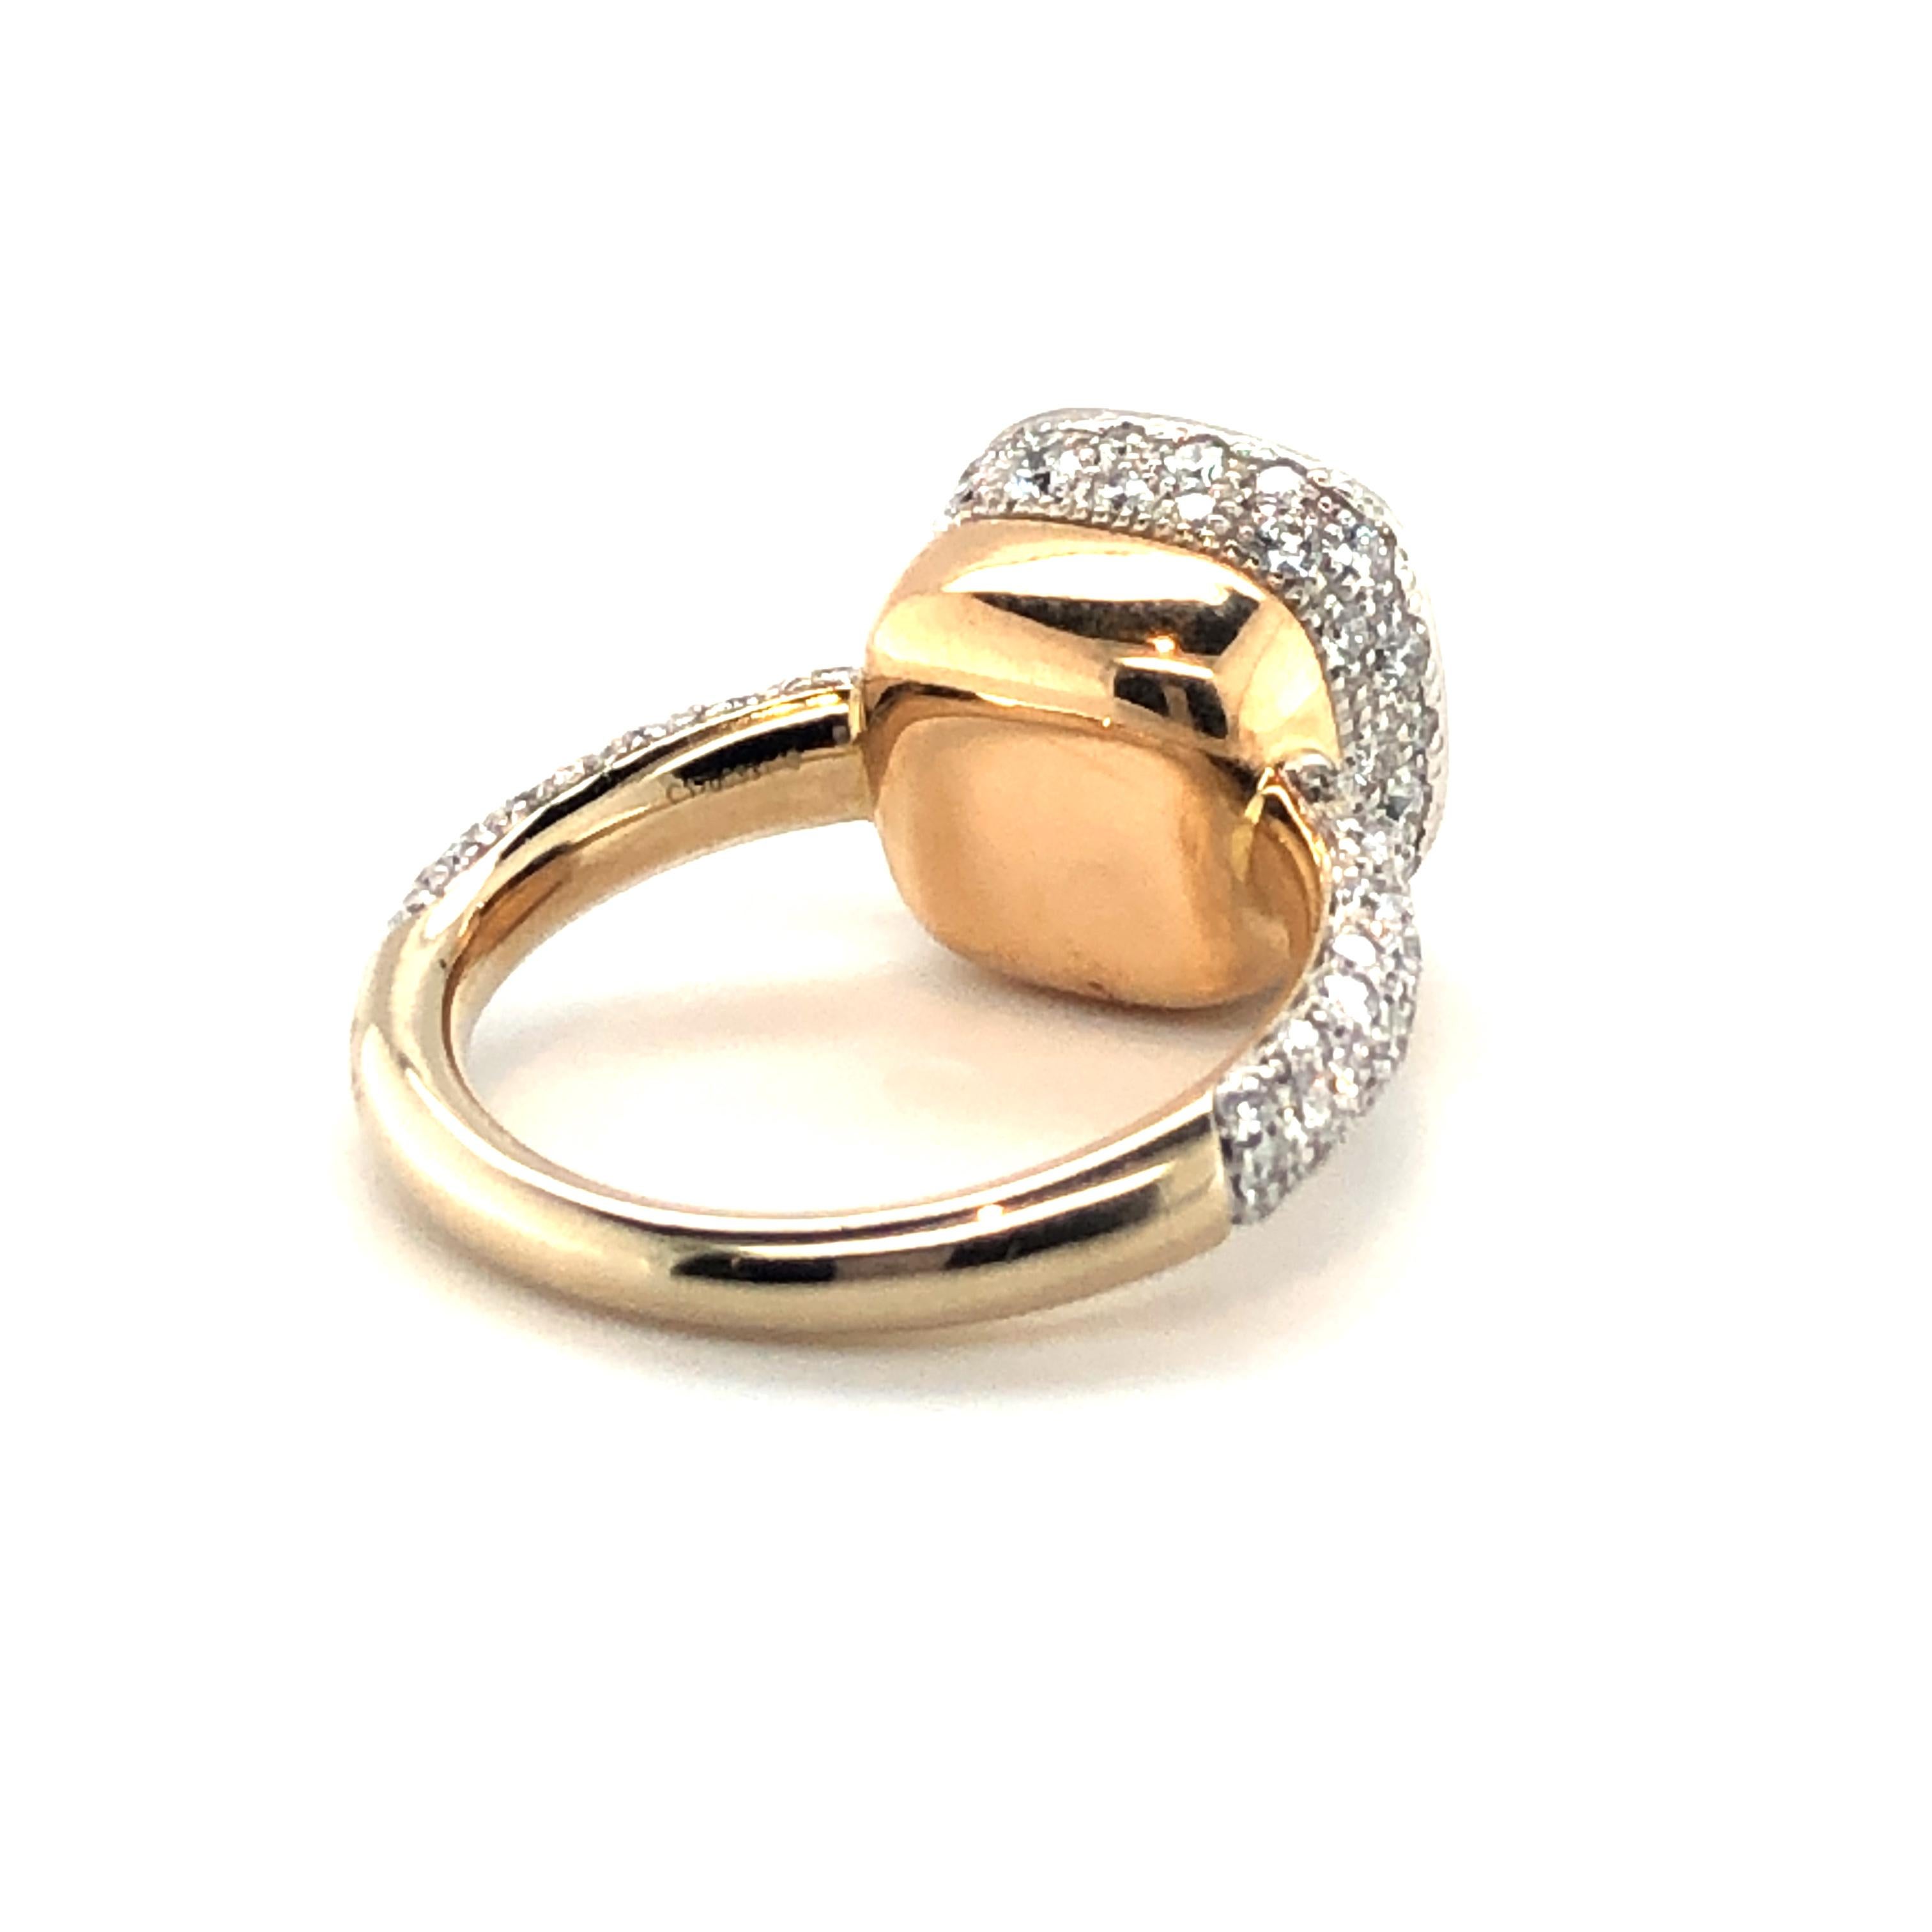 Women's or Men's Pomellato Nudo Maxi Solitaire Ring with Diamonds in 18 Karat White and Rose Gold